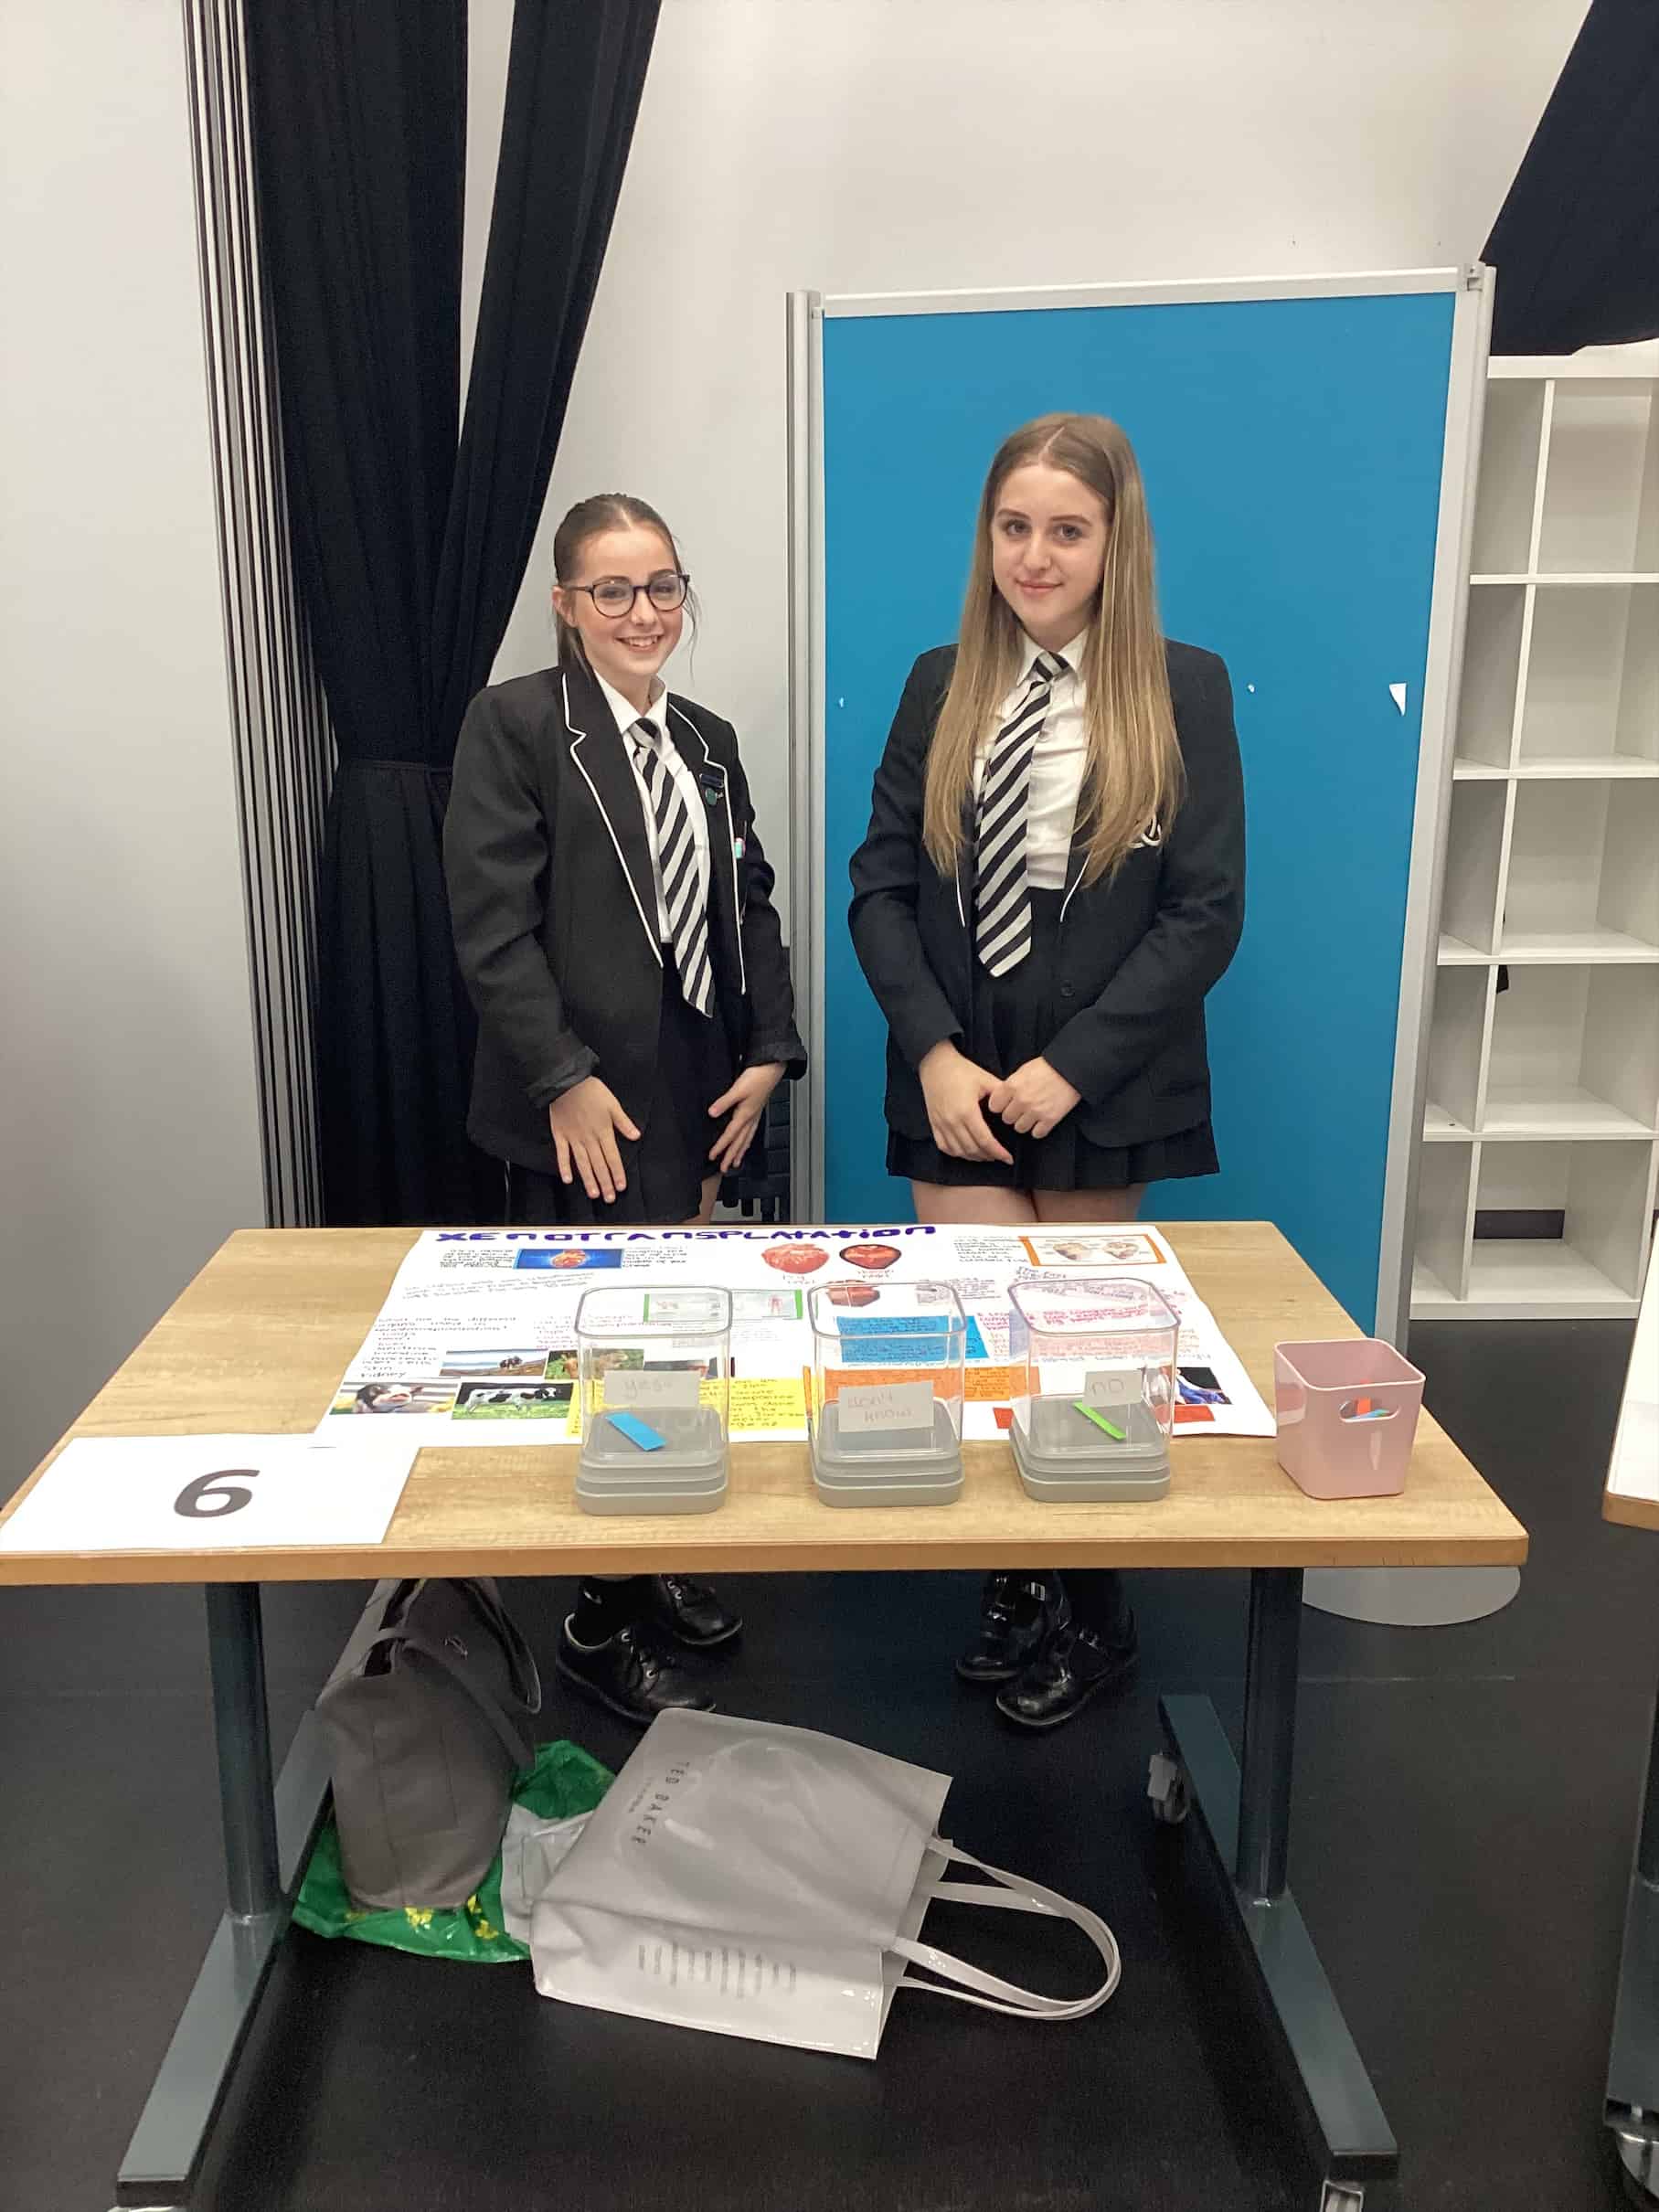 A team representing Laurus Ryecroft at the Trust Science Fair with their project on Xenotransplantation, during Super Science Week.